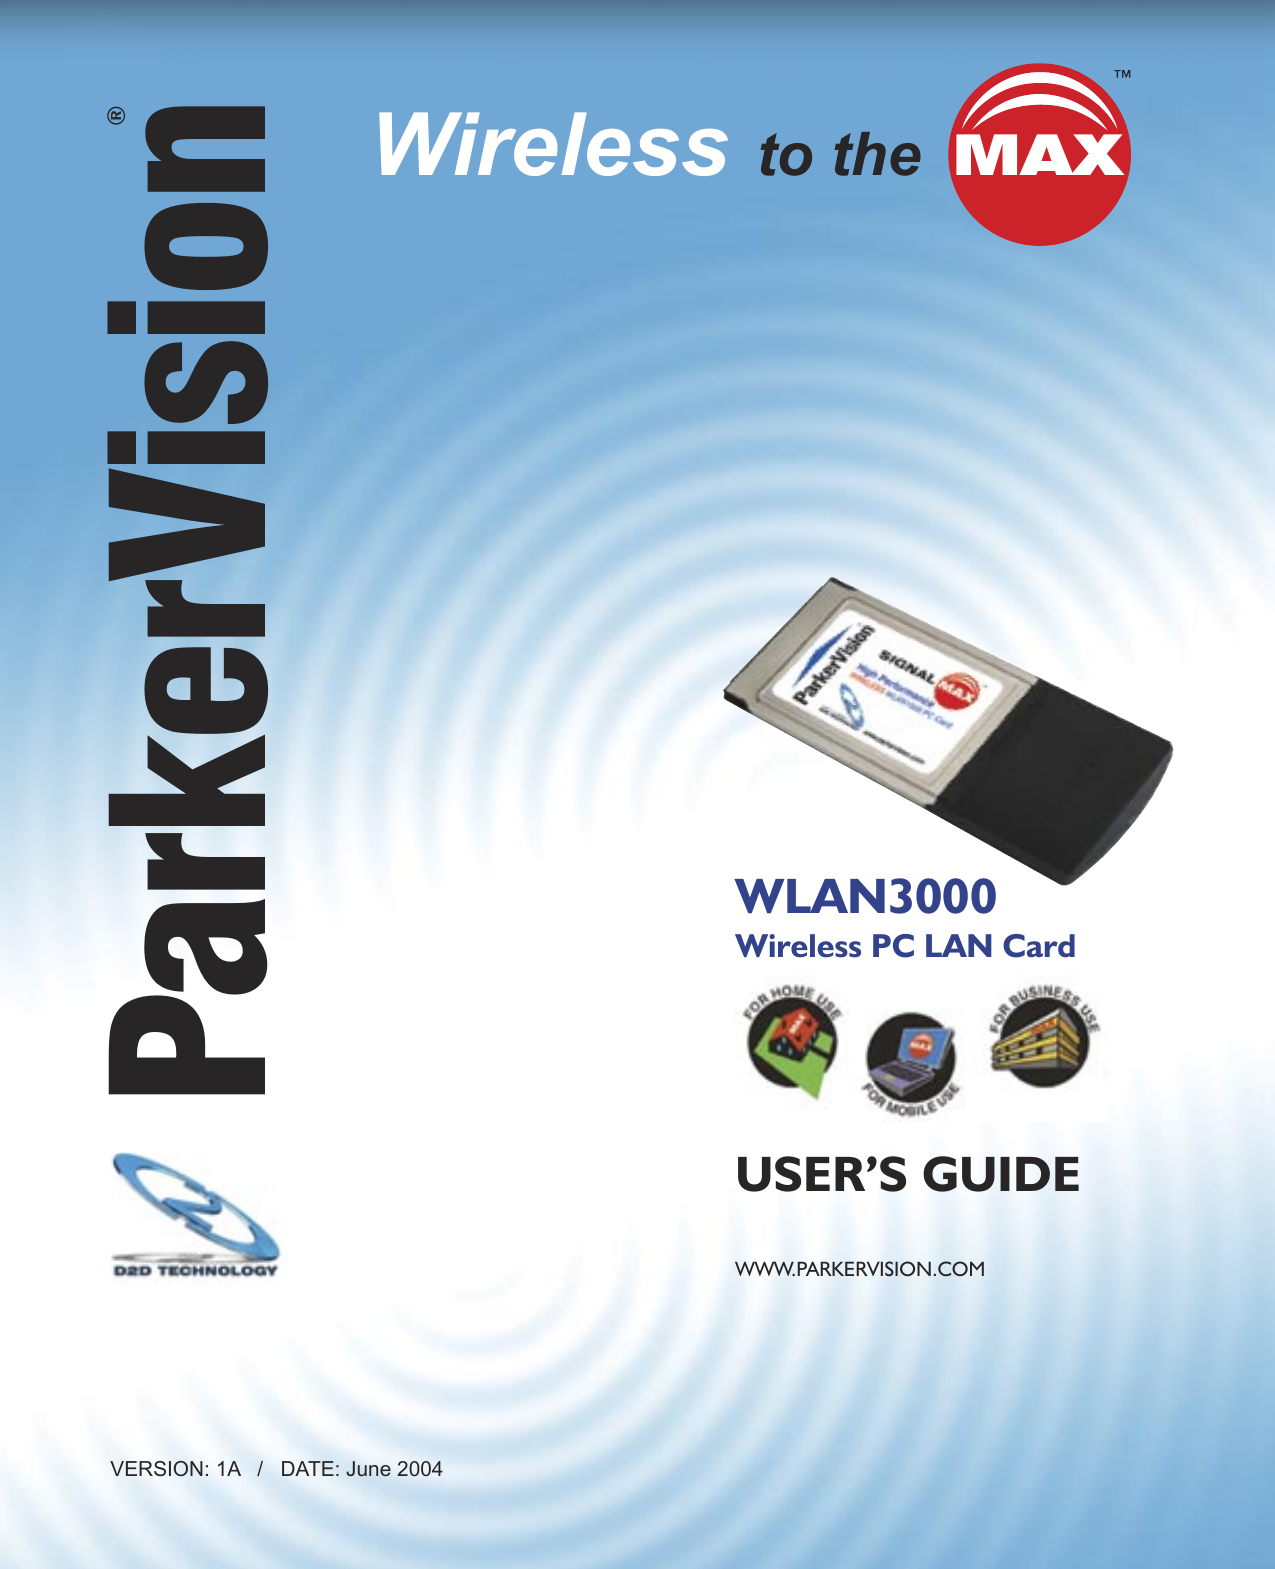 VERSION: 1A   /   DATE: June 2004WLAN3000 Wireless PC LAN Card USER’S GUIDEWWW.PARKERVISION.COMWireless to theParkerVision®SIGNAL MAX